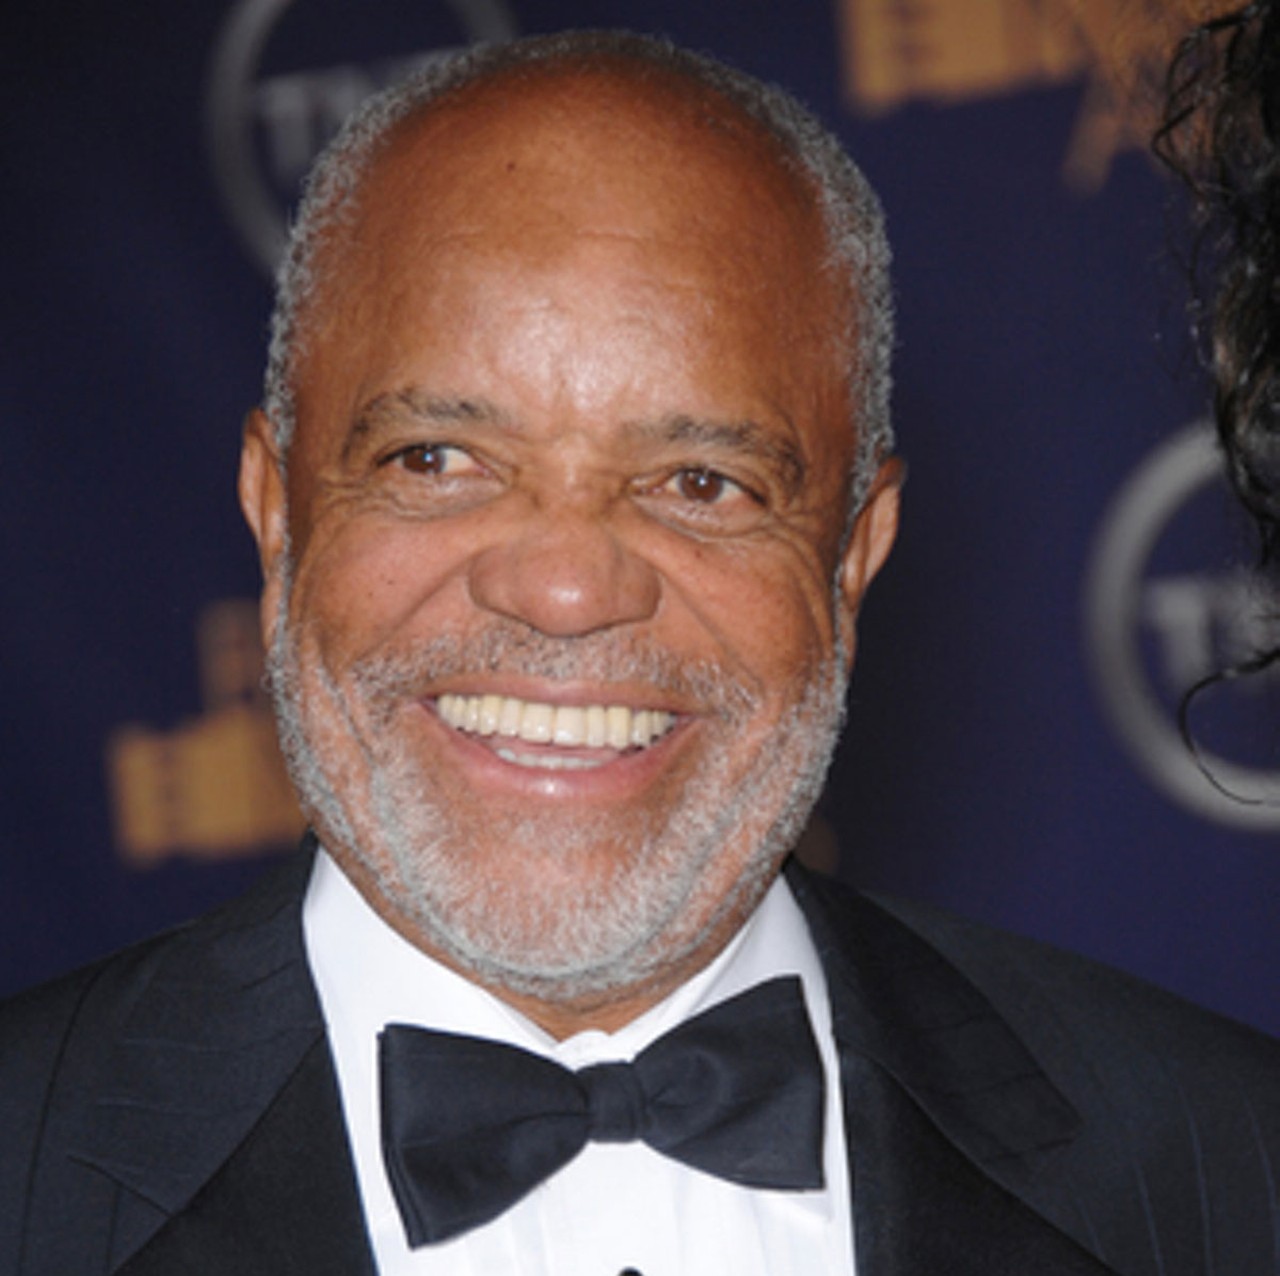 Berry Gordy, Jr. 
Born in Detroit, Berry Gordy, Jr. was the founder of Motown Records, one of the most successful and influential record labels in the history of American music. Gordy’s contributions to the music industry revolutionized popular music and helped to promote Black artists on a global scale. The producer is currently 94 years old and resides in Los Angeles. 